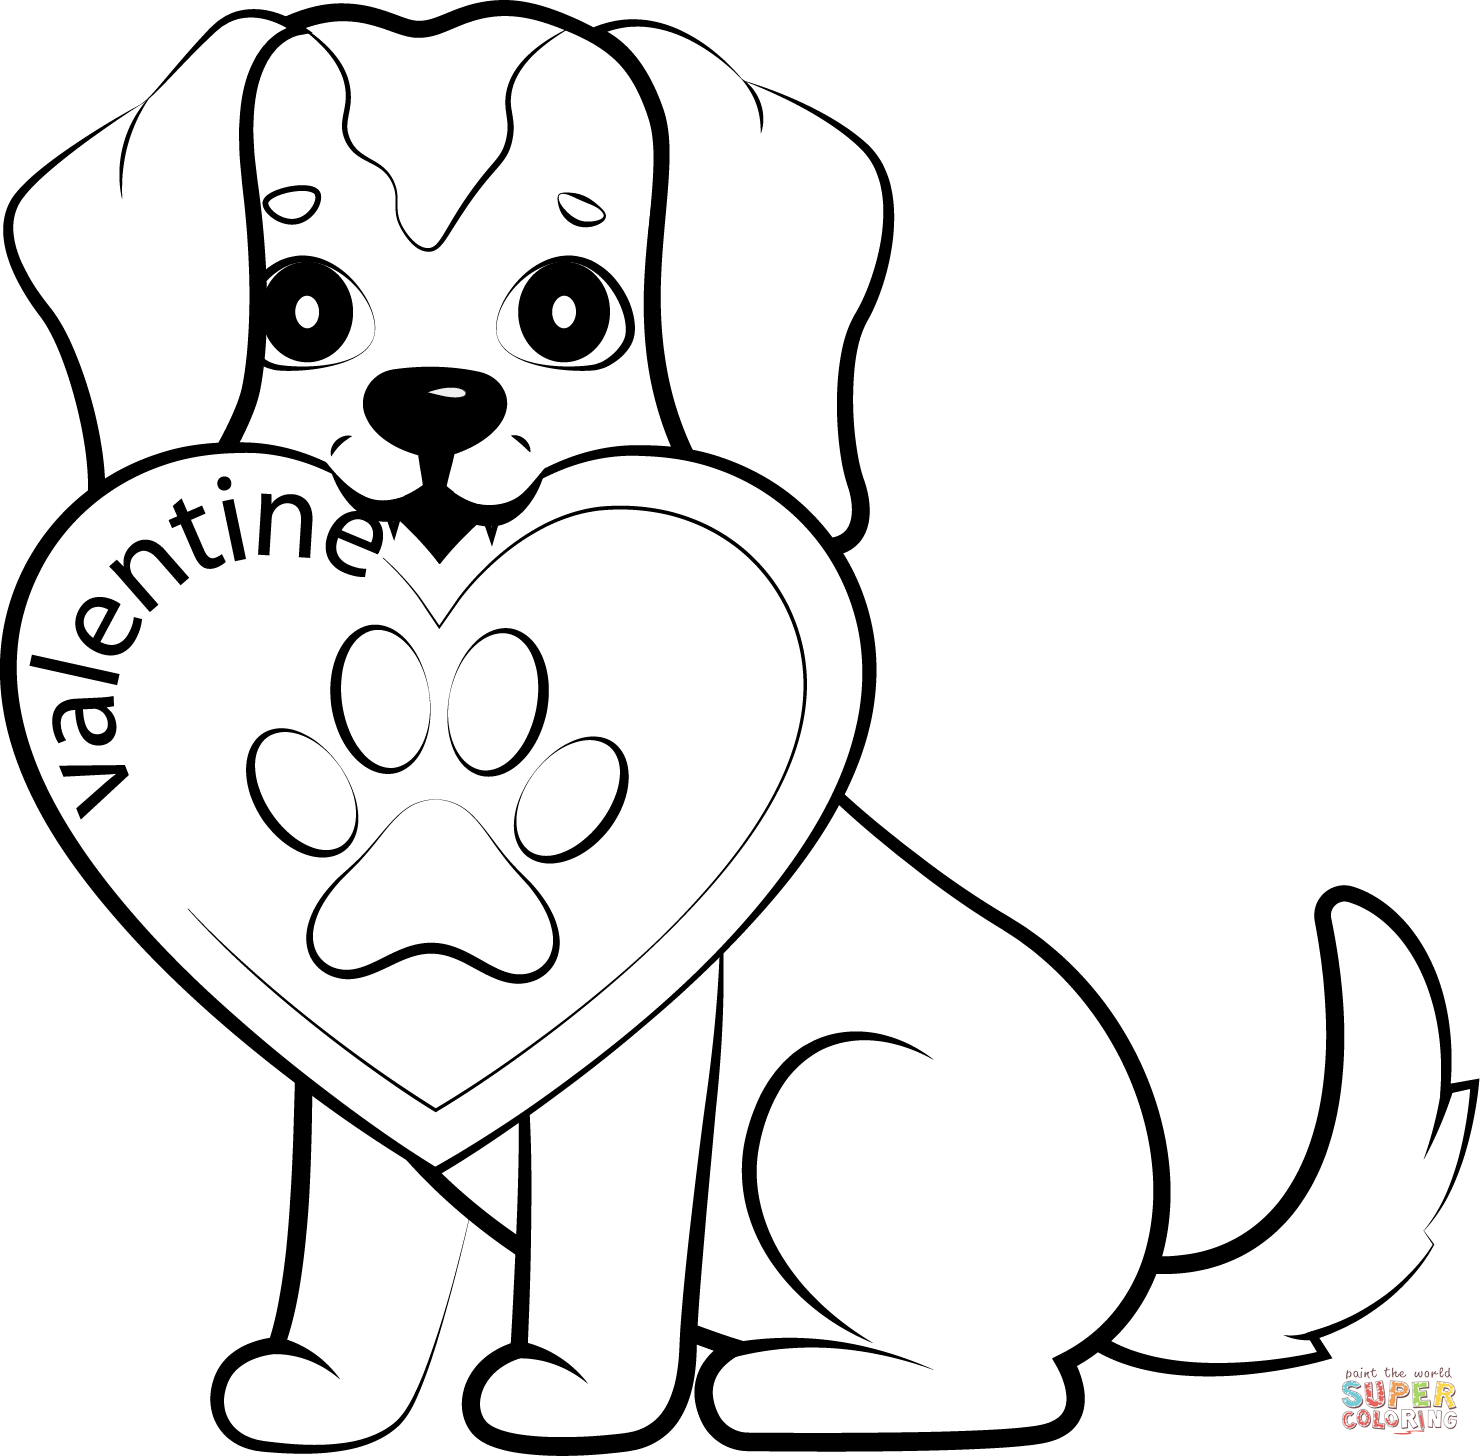 Valentines puppy coloring page free printable coloring pages